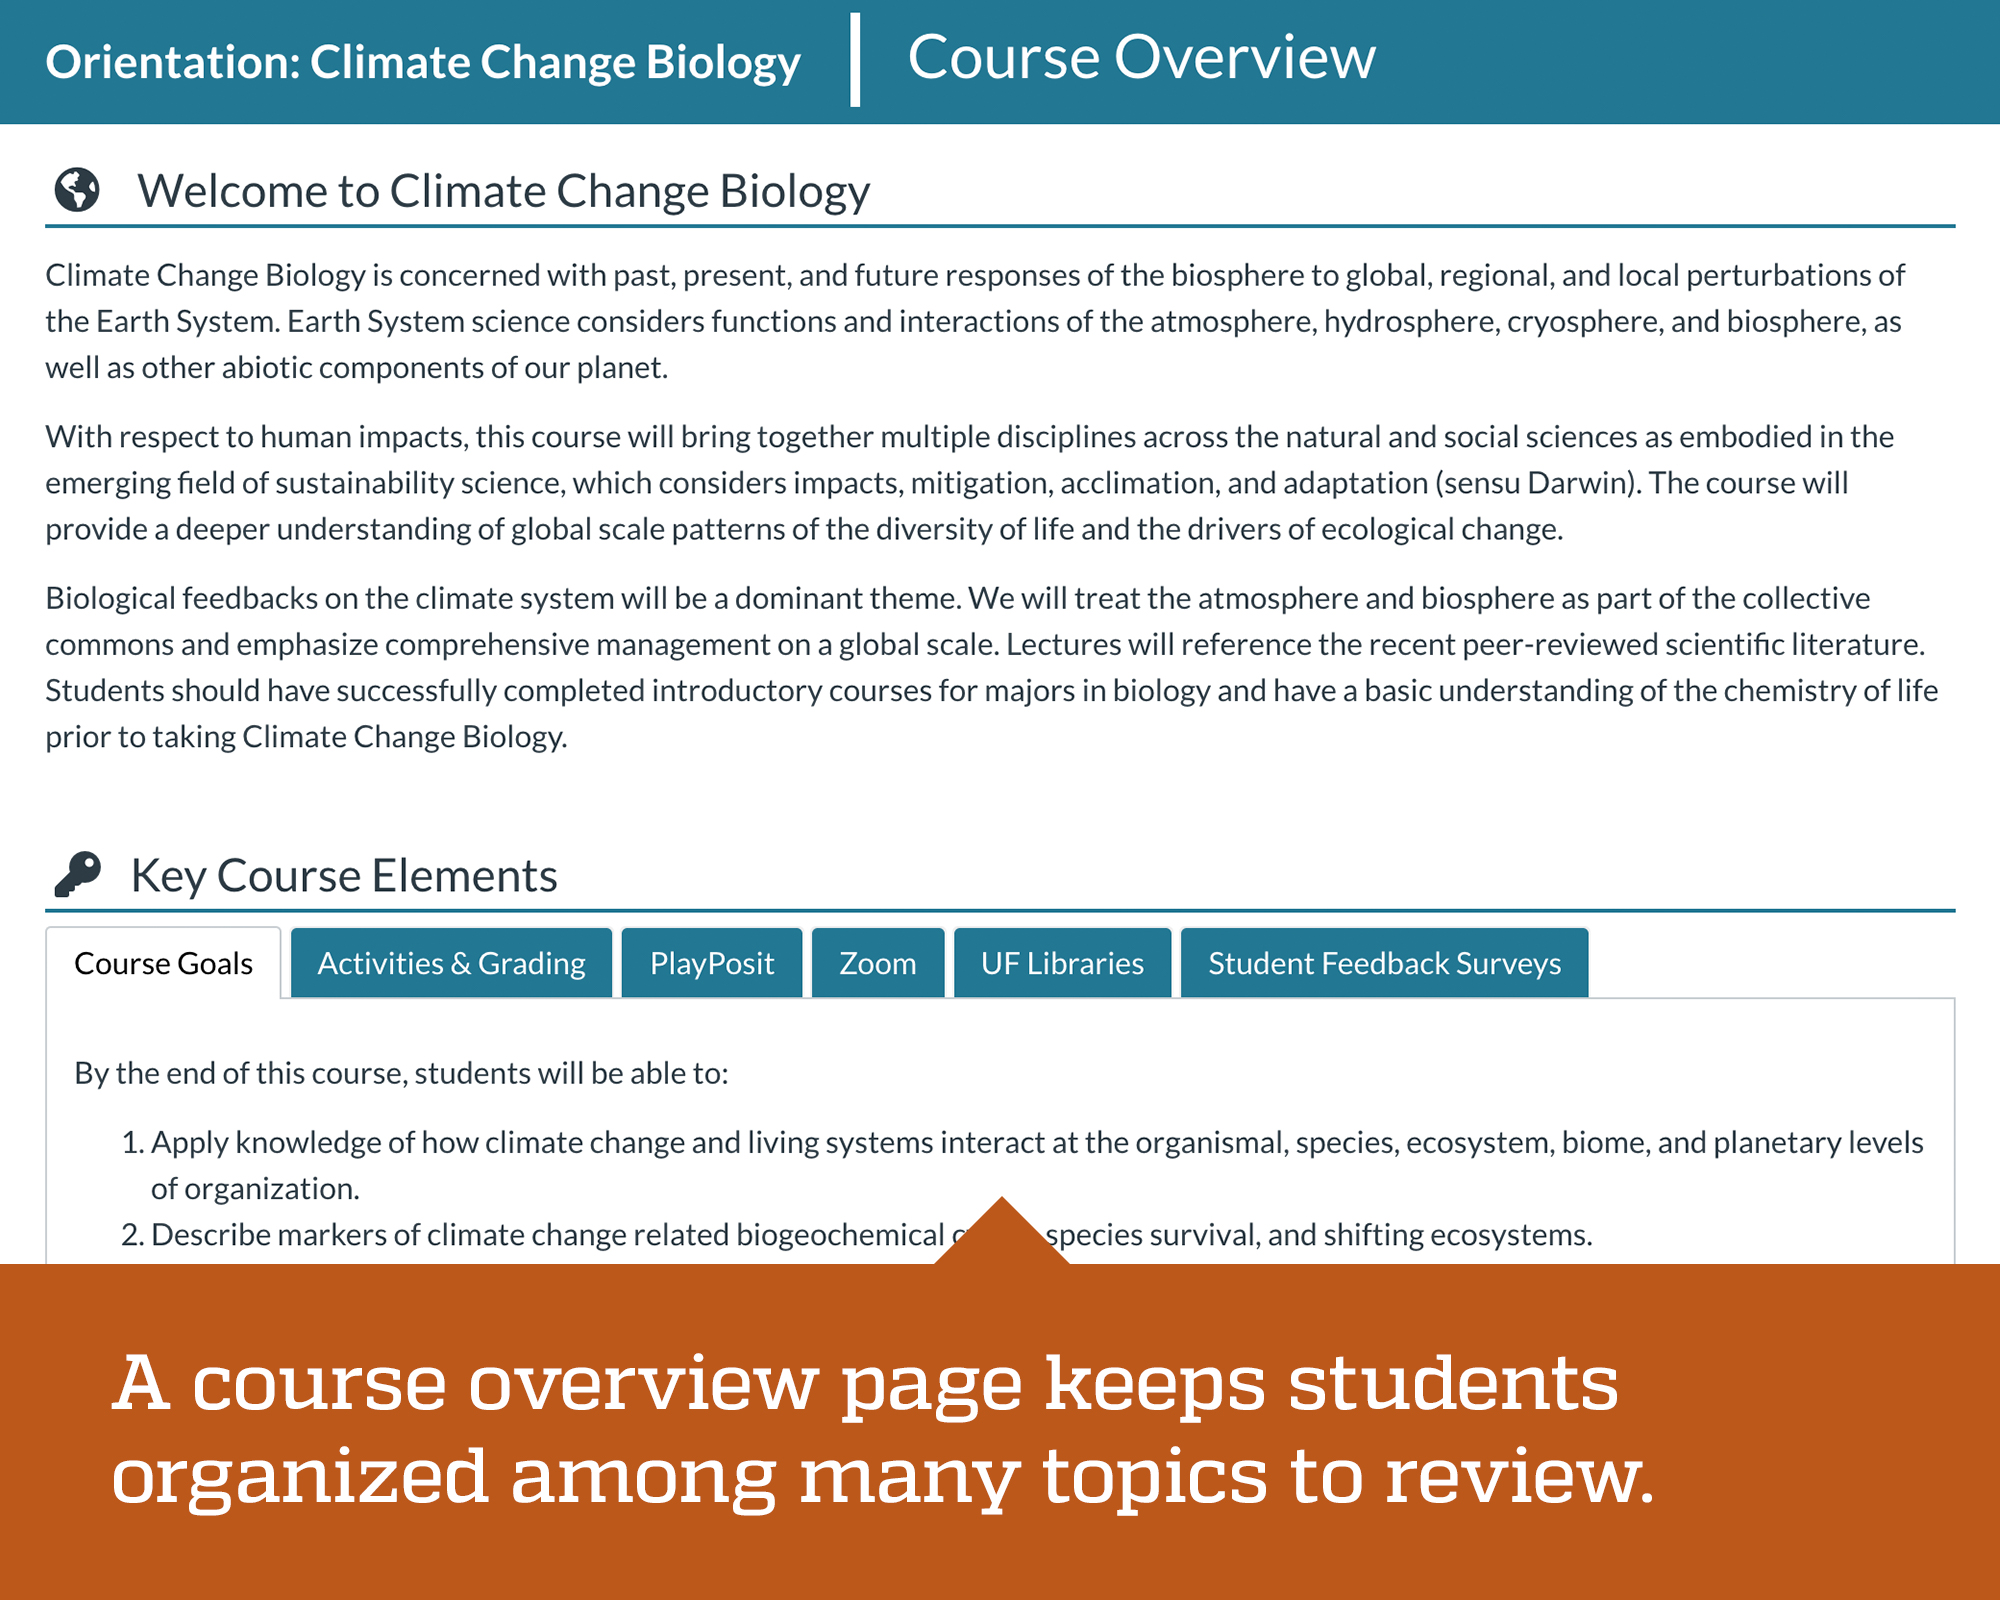 Screenshot of a course landing page designed by Center for Online Innovation and Production at University of Florida